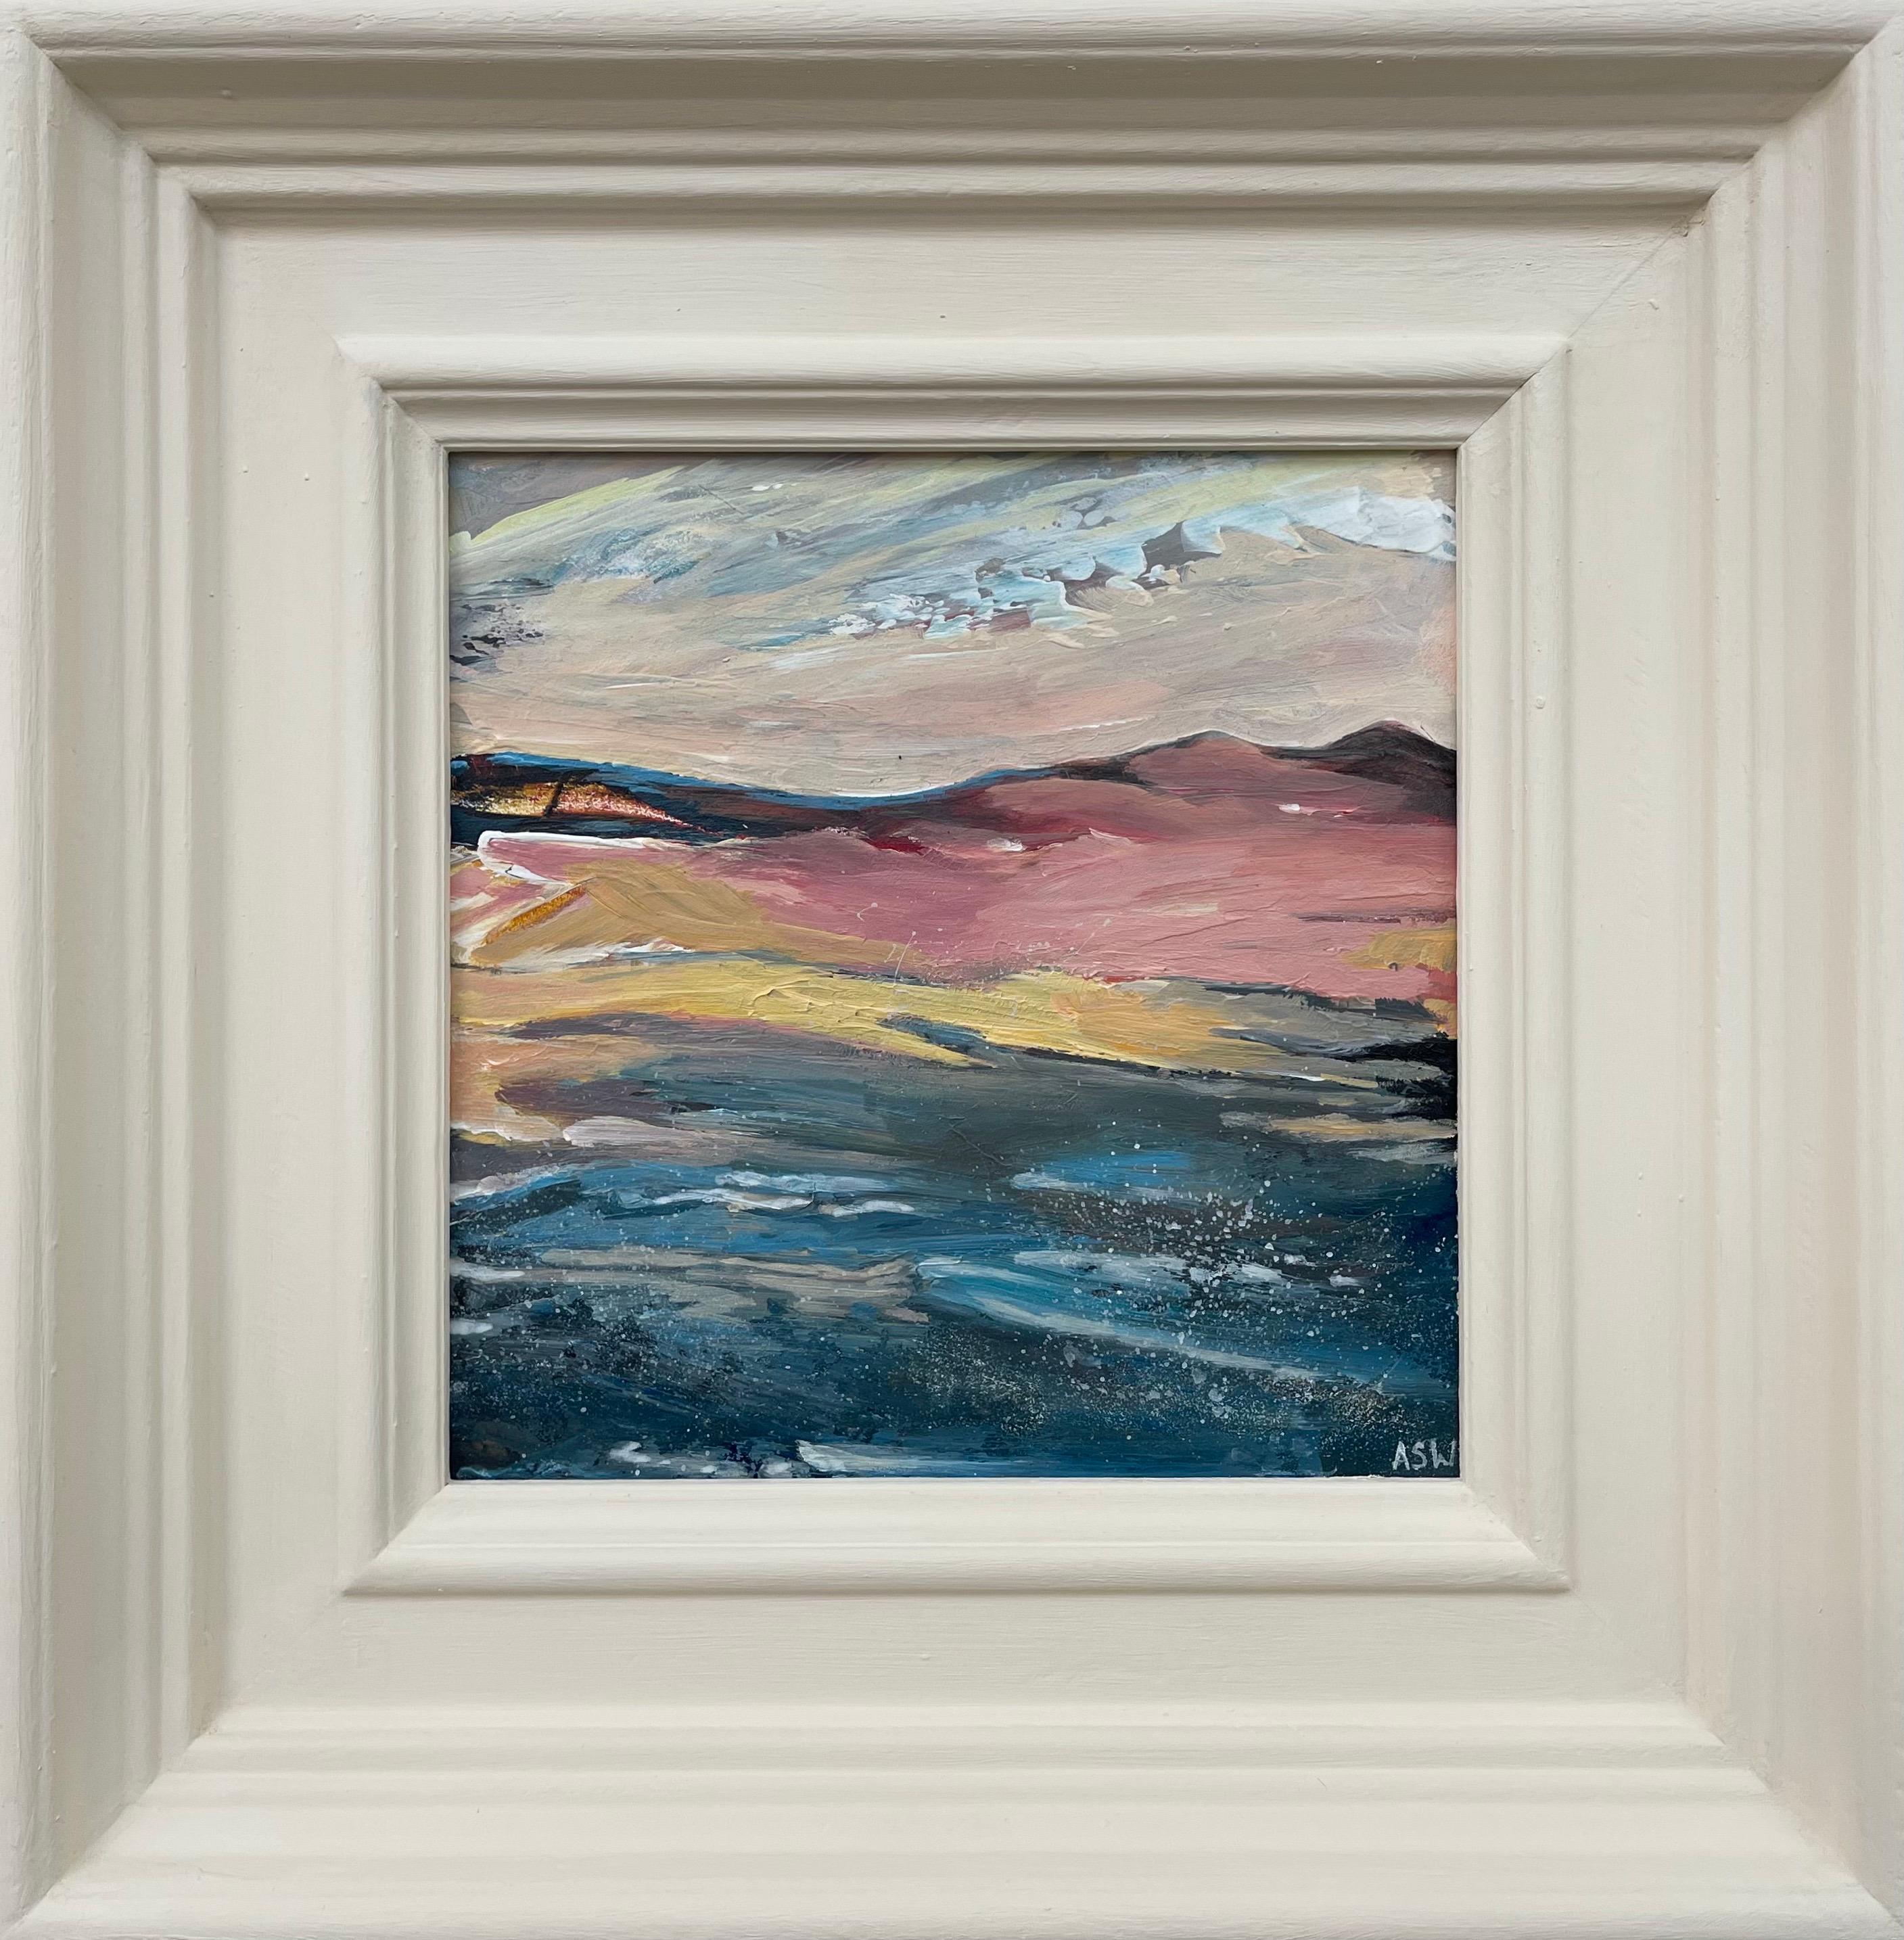 Angela Wakefield Landscape Painting - Miniature Abstract Beach Seascape Landscape Study by Contemporary British Artist